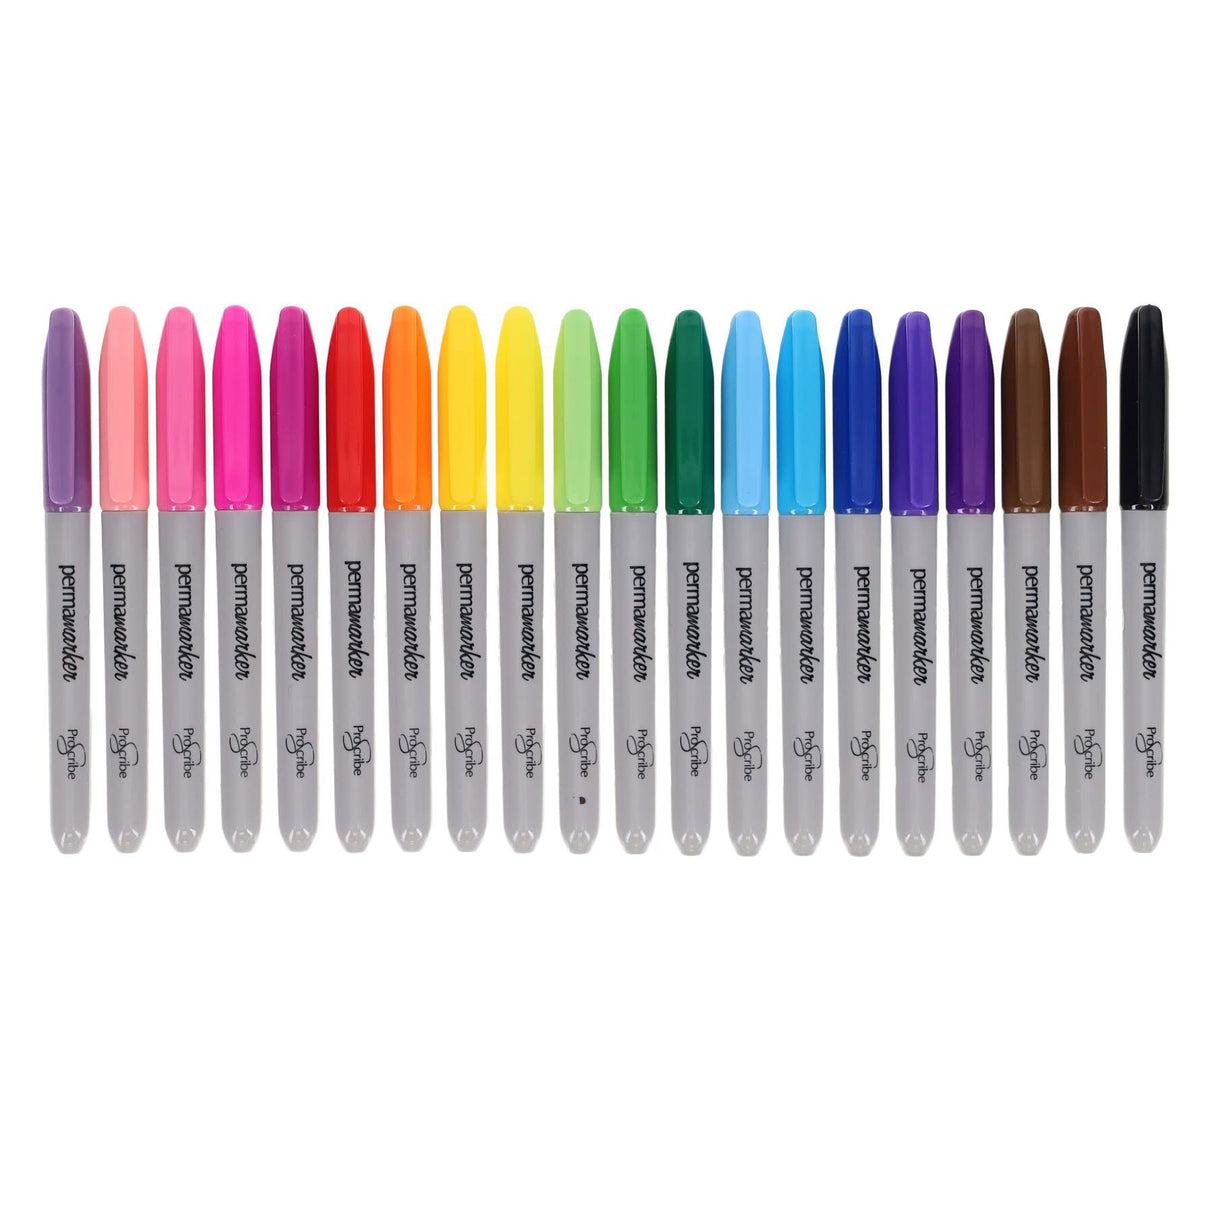 Pro:Scribe Permanent Markers - Pack of 20 | Stationery Shop UK